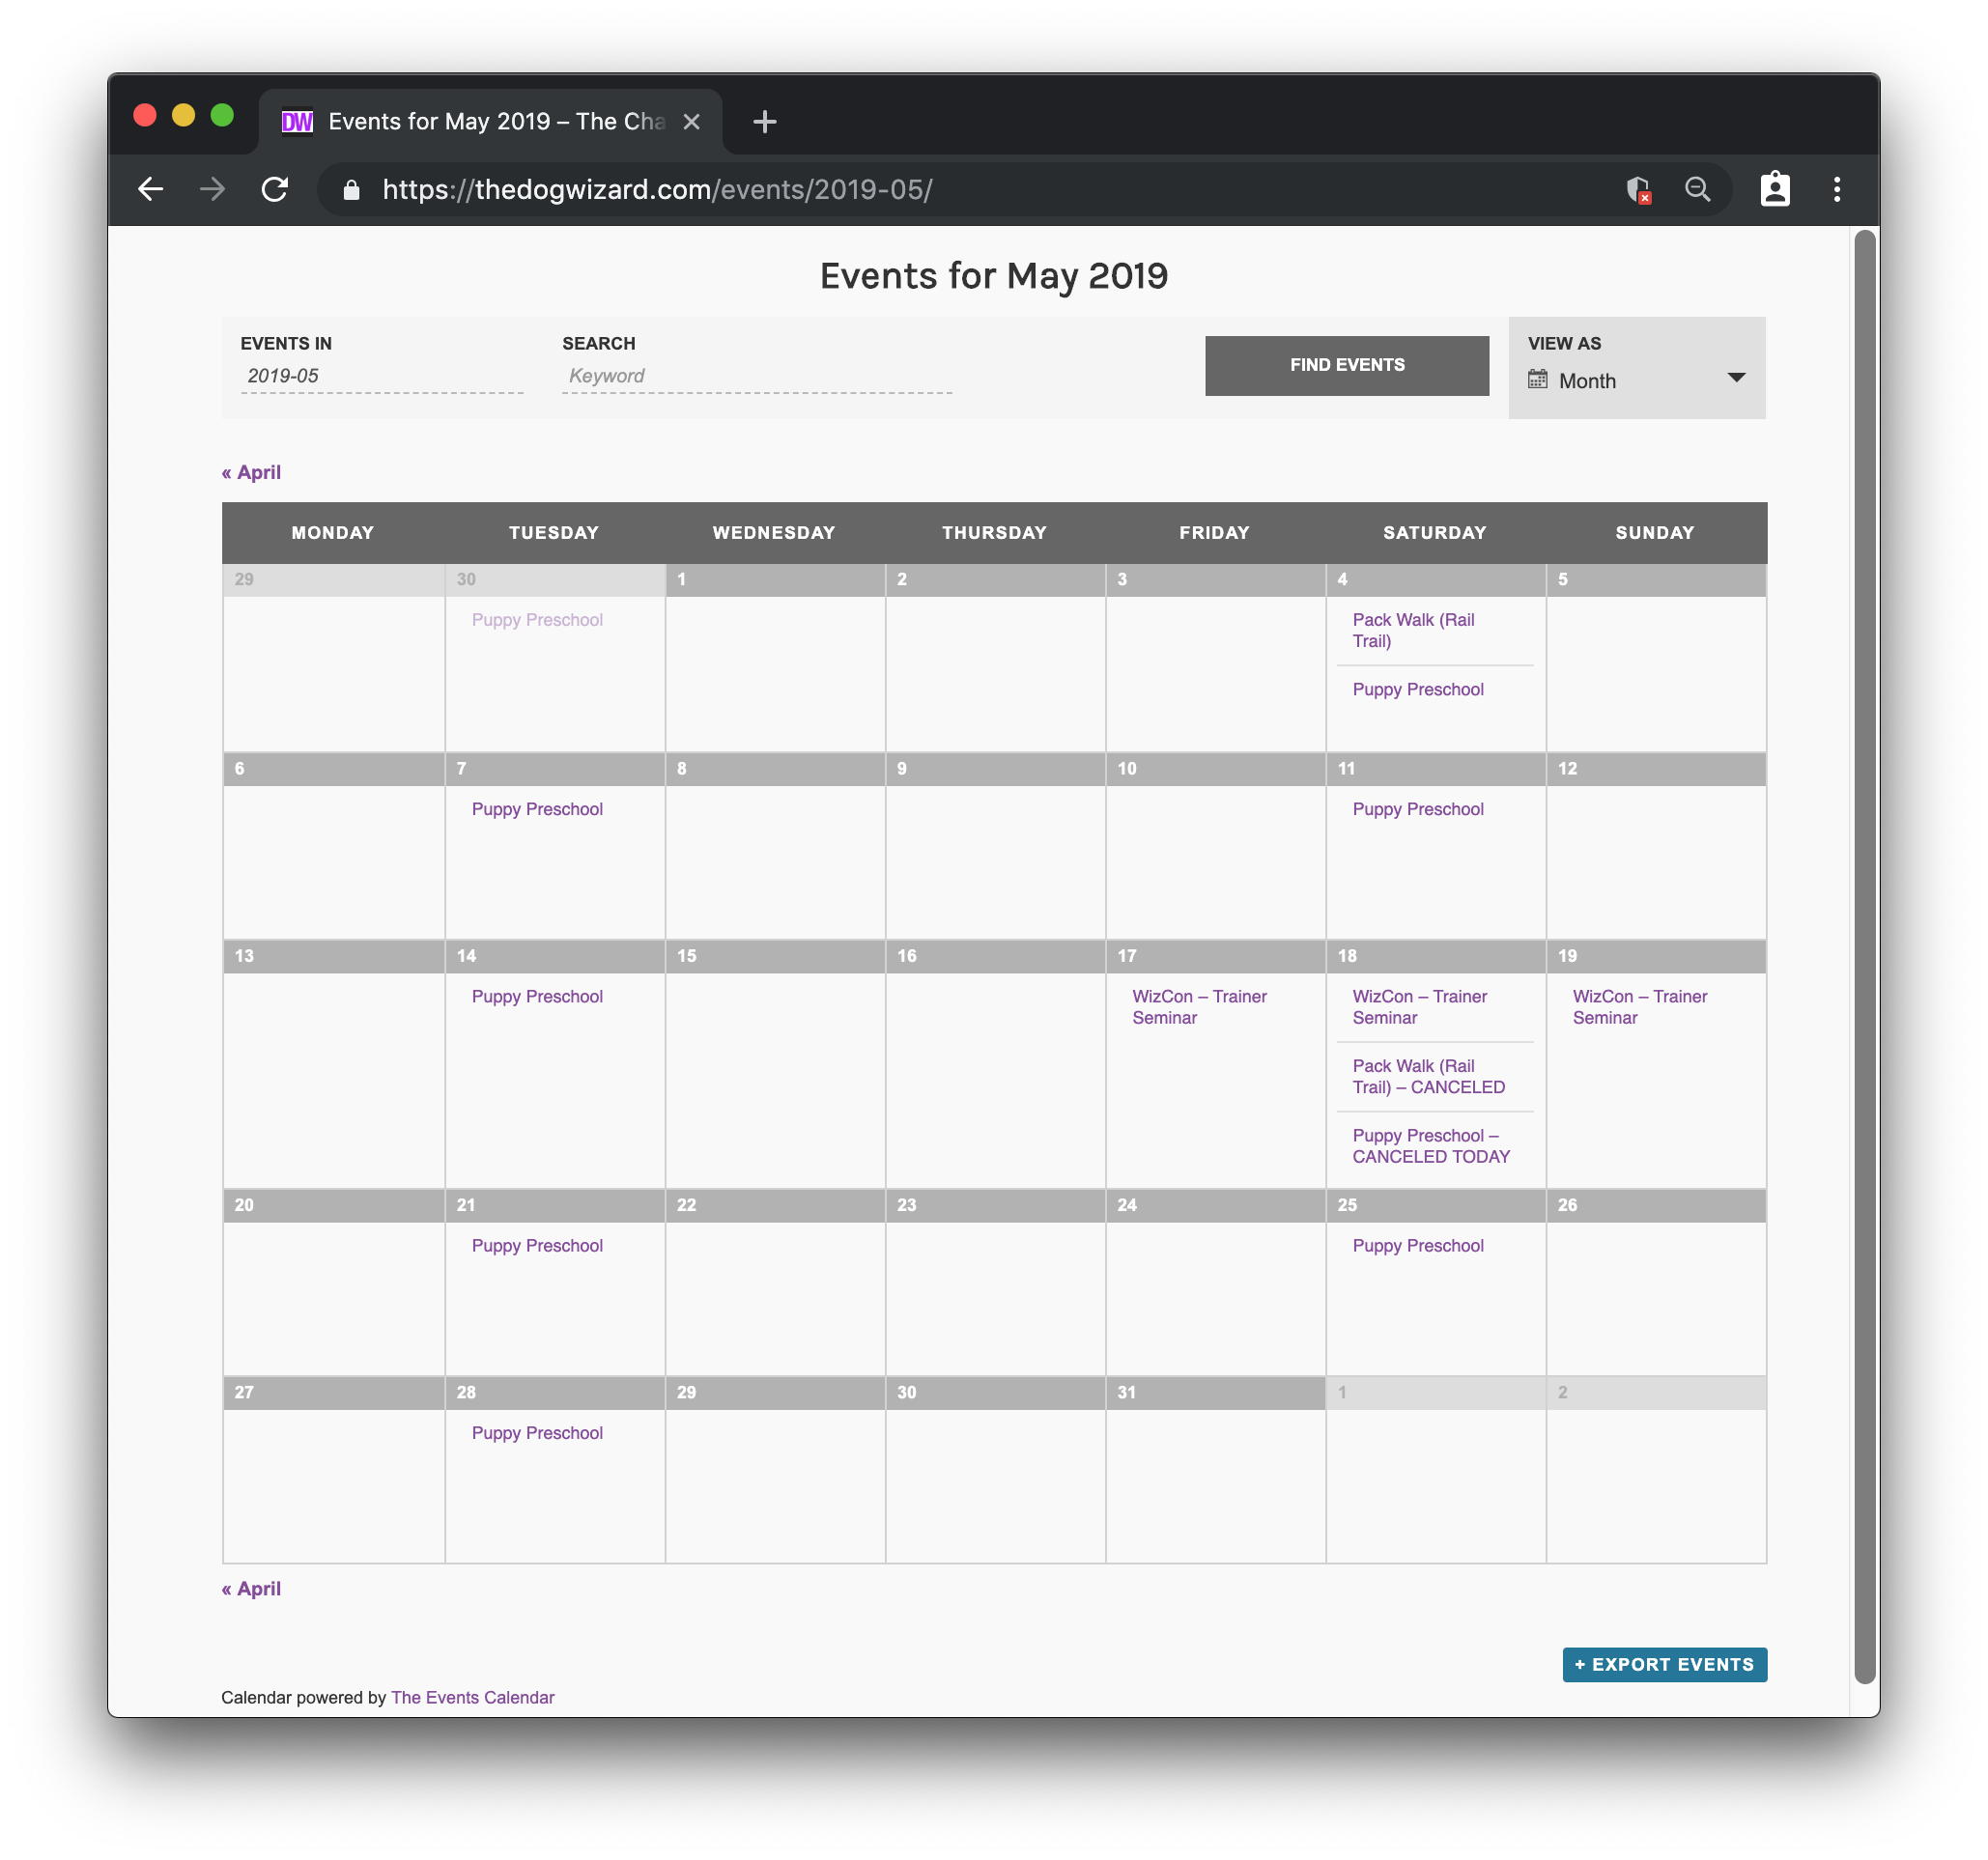 A screenshot of The Dog Wizard website calendar for the month of May 2019.